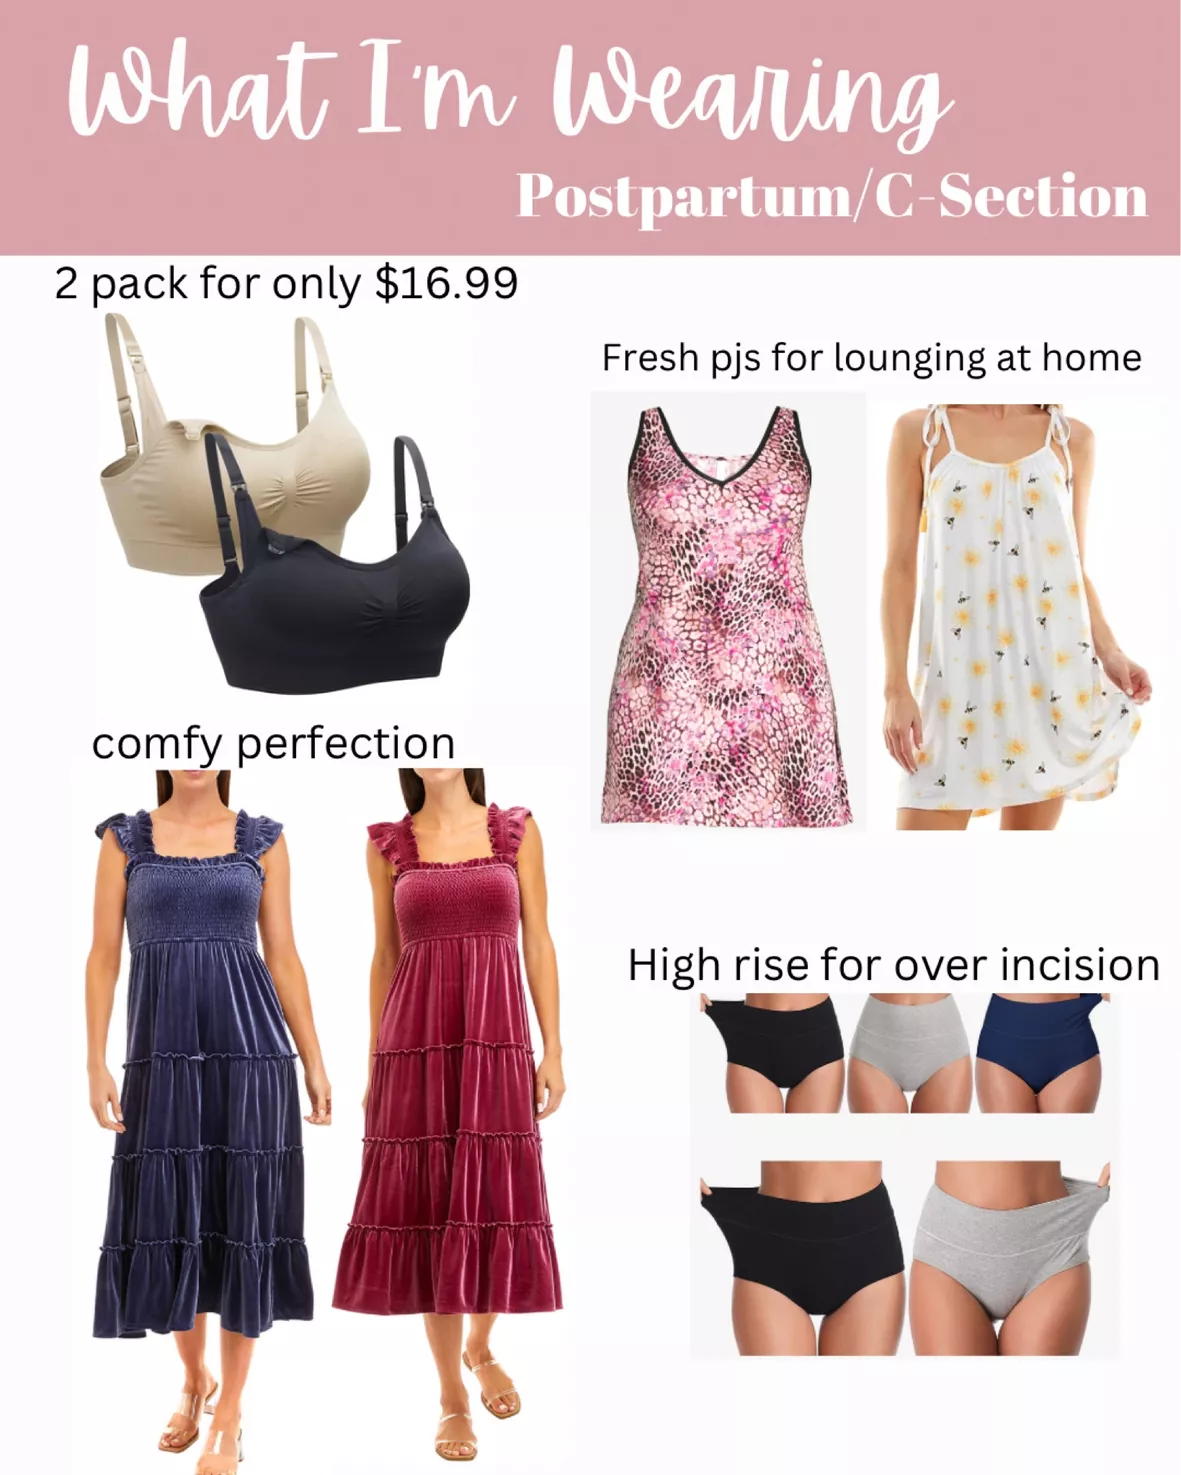 What To Wear After C-Section (According To RN)